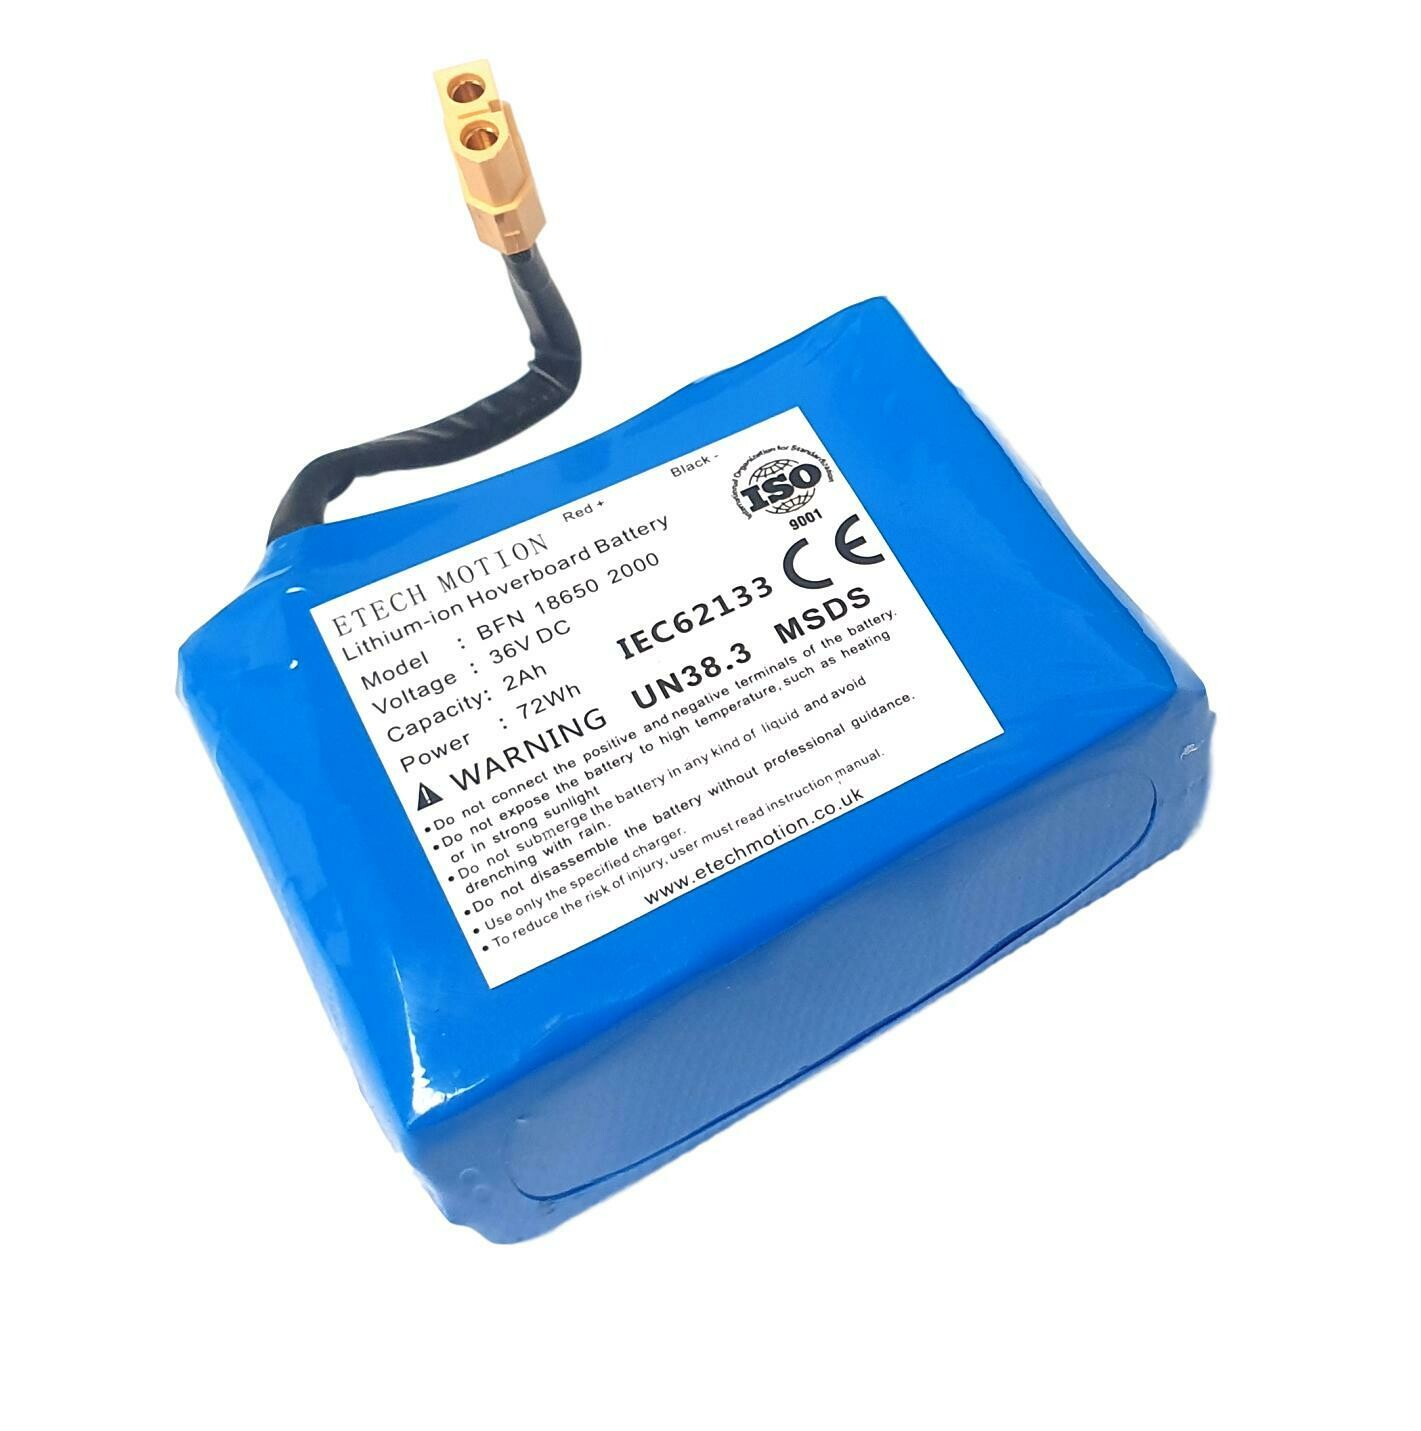 Replacement Battery For Zinc Hoverboard 36v 2Ah 2000mAh 72Wh